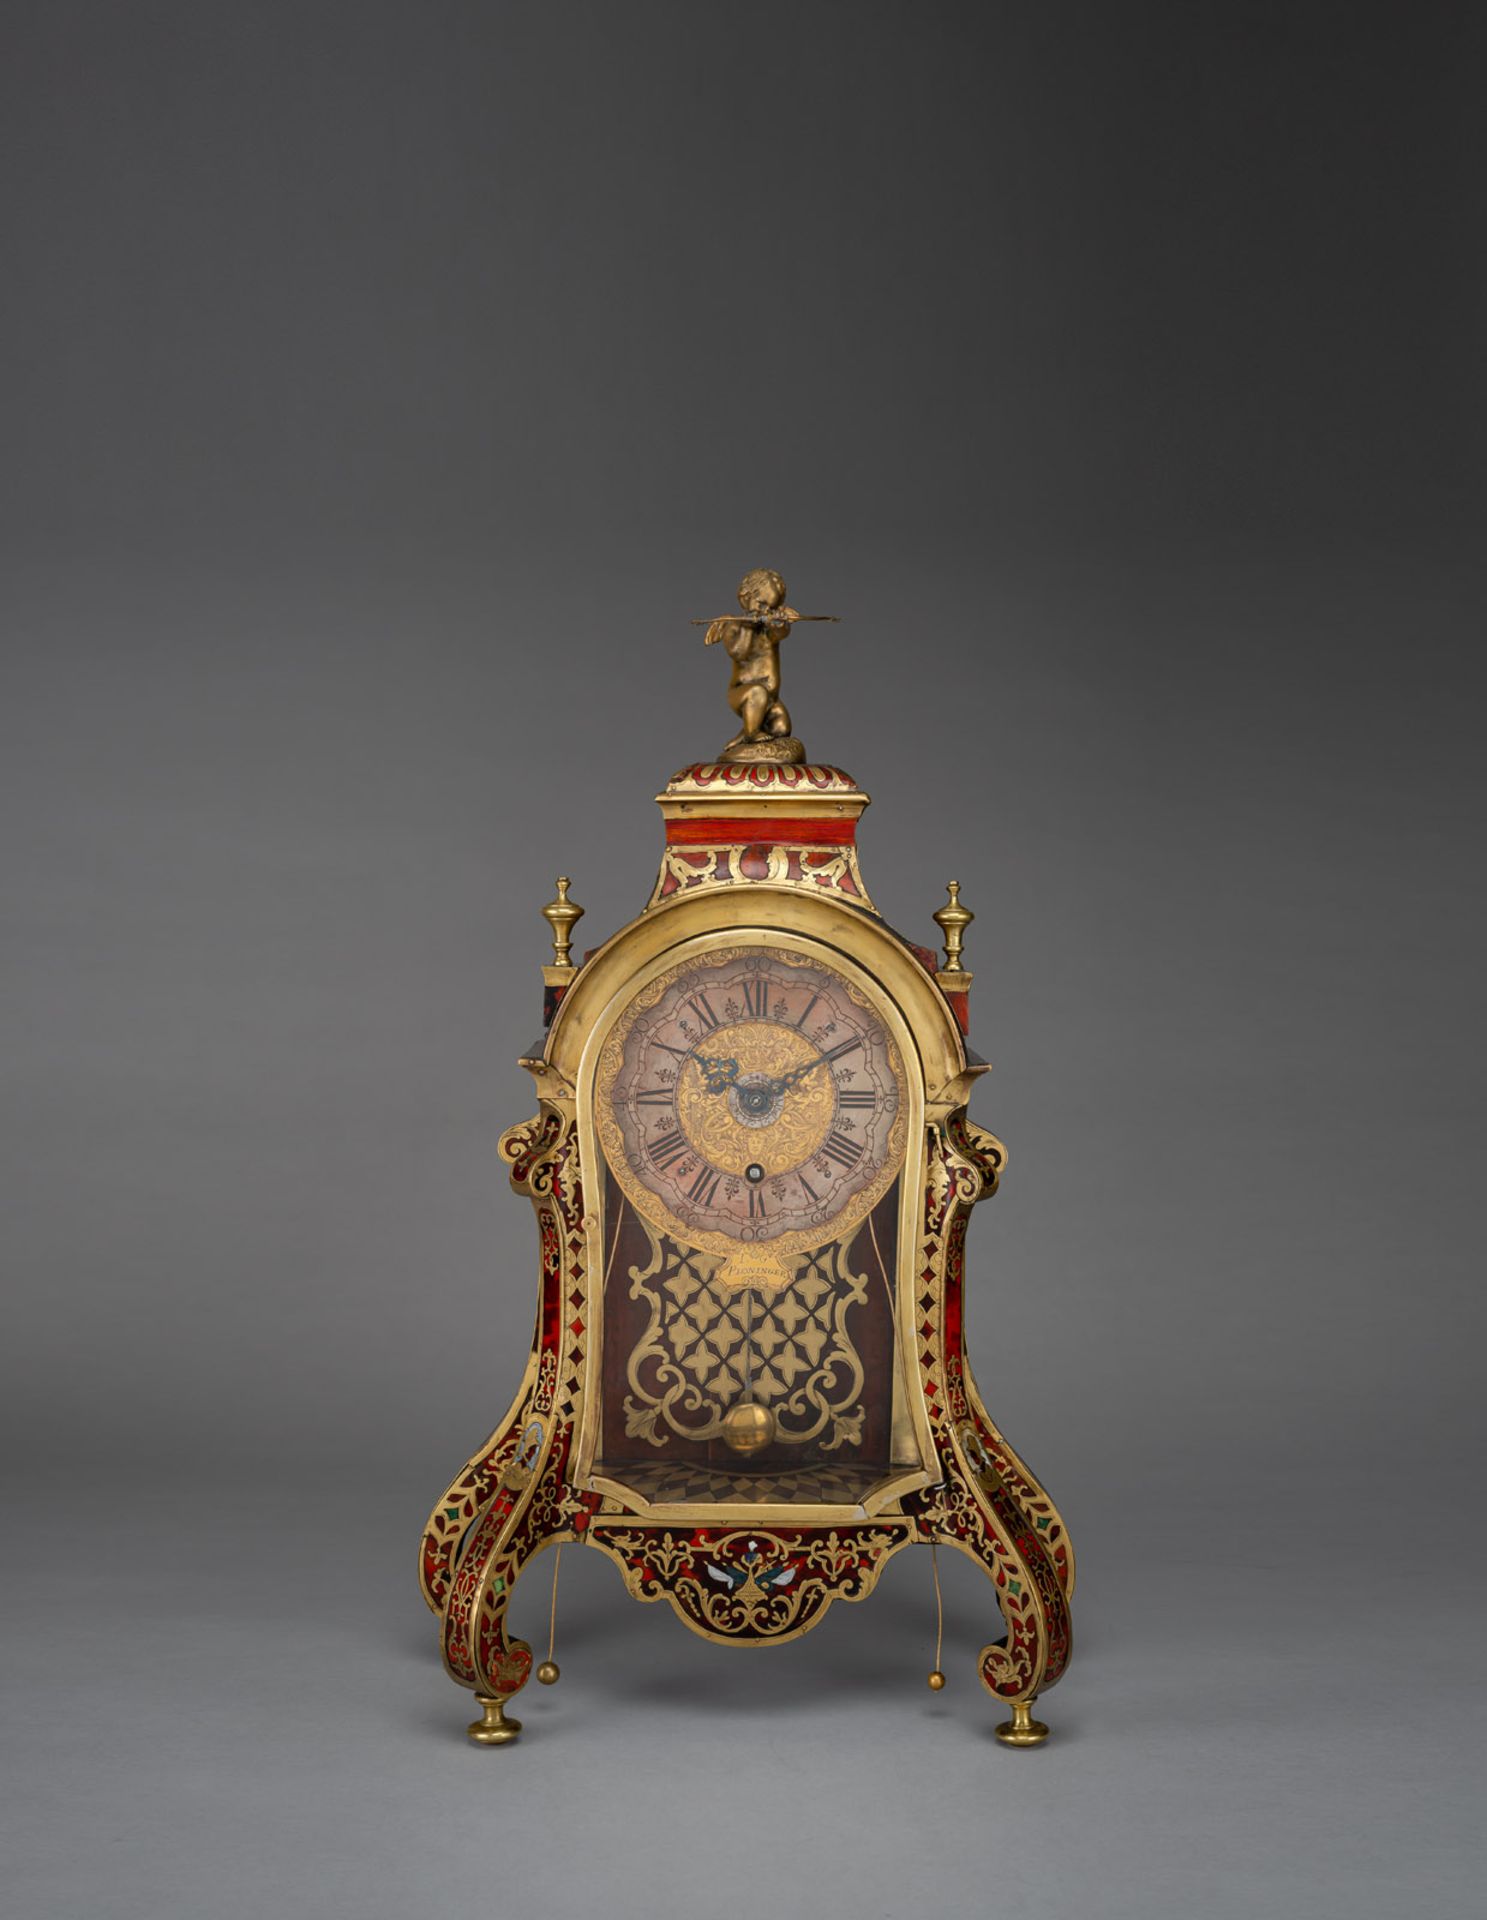 A RARE AND EXCEPTIONAL GERMAN BOULLE PATTERN "STUTZUHR" PENDULE